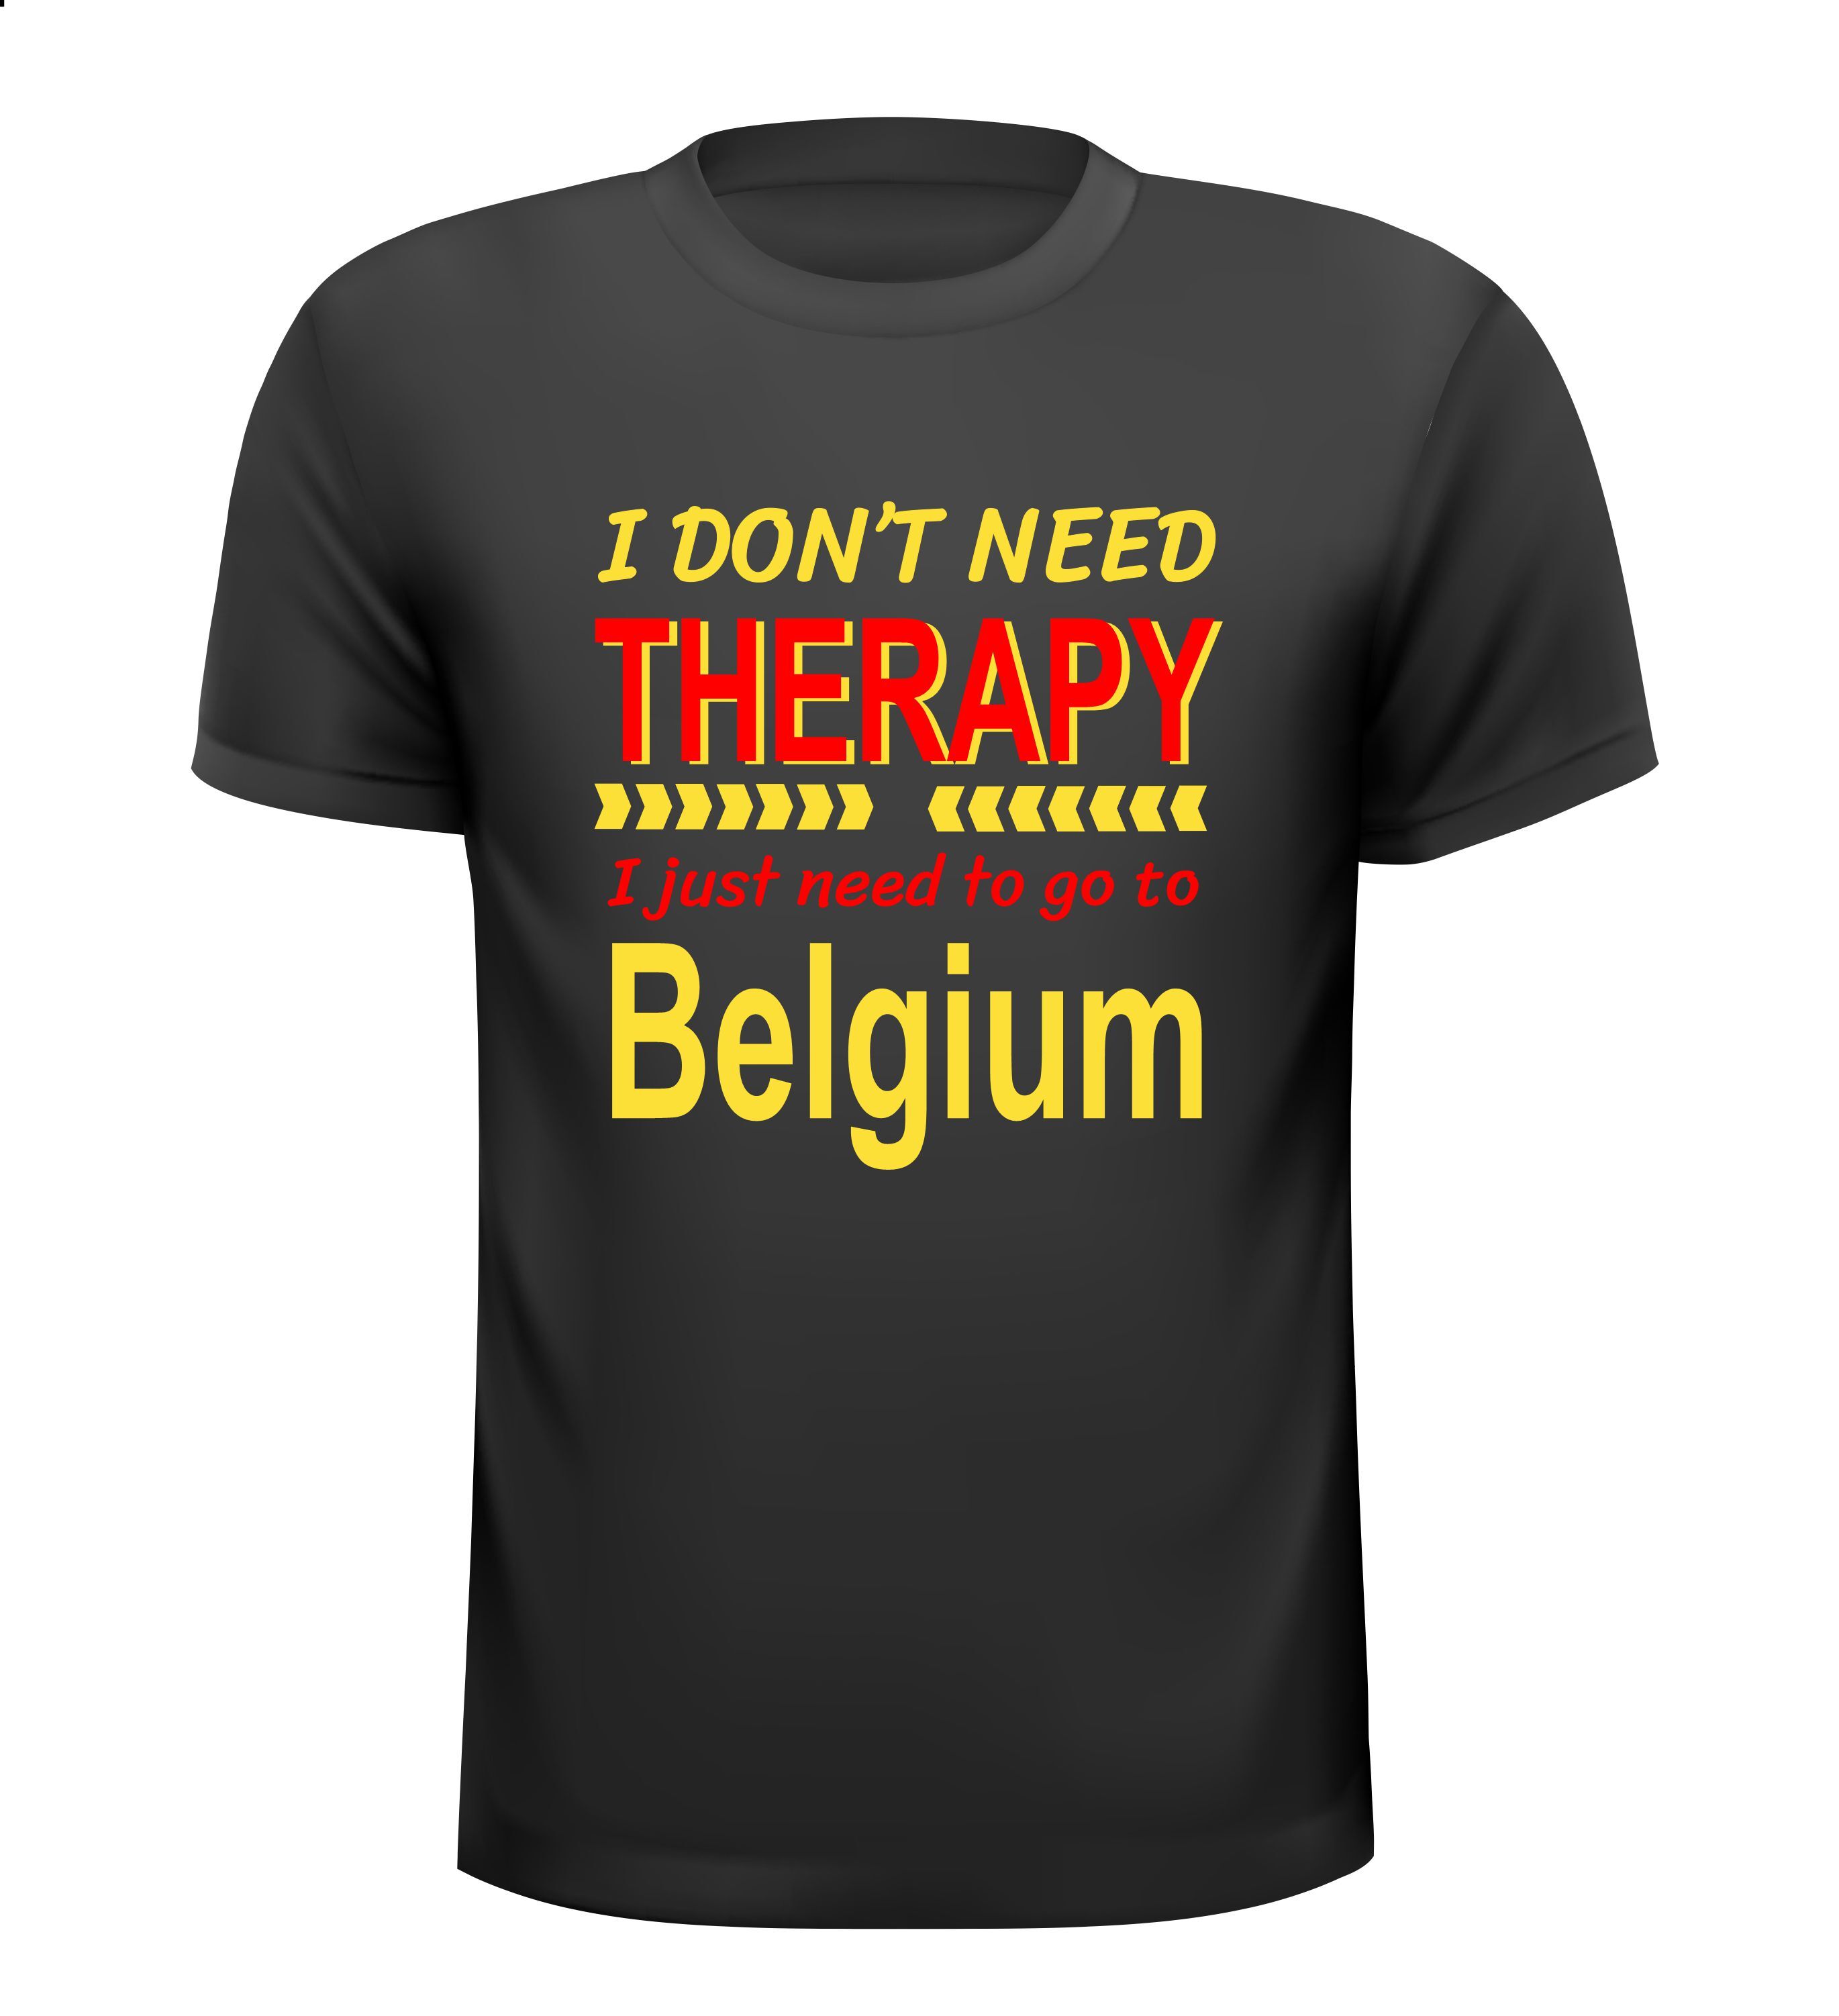 Belgisch T-shirt I don't need therapy, I just need to go to Belgium